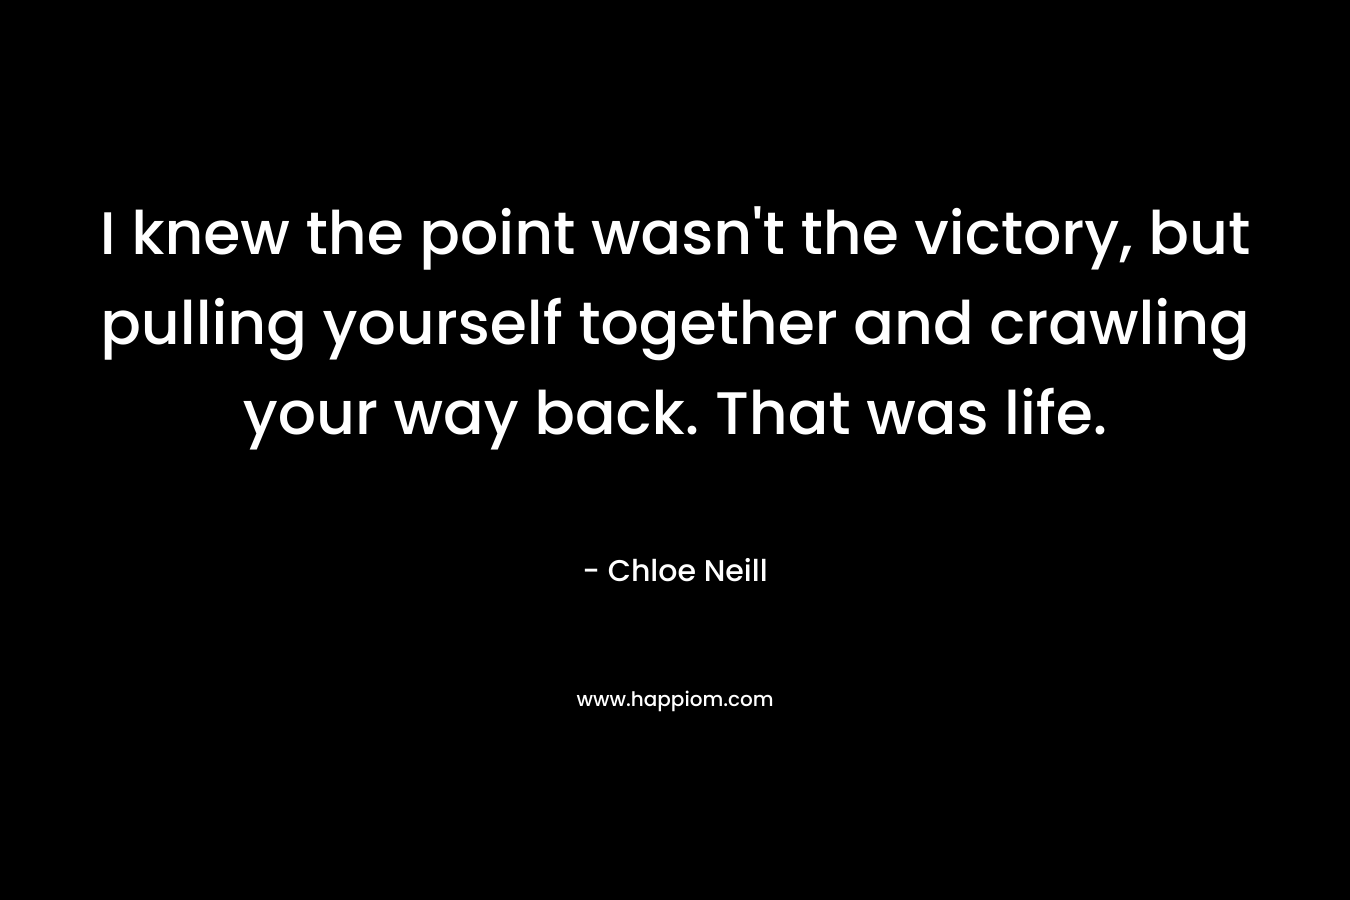 I knew the point wasn’t the victory, but pulling yourself together and crawling your way back. That was life. – Chloe Neill